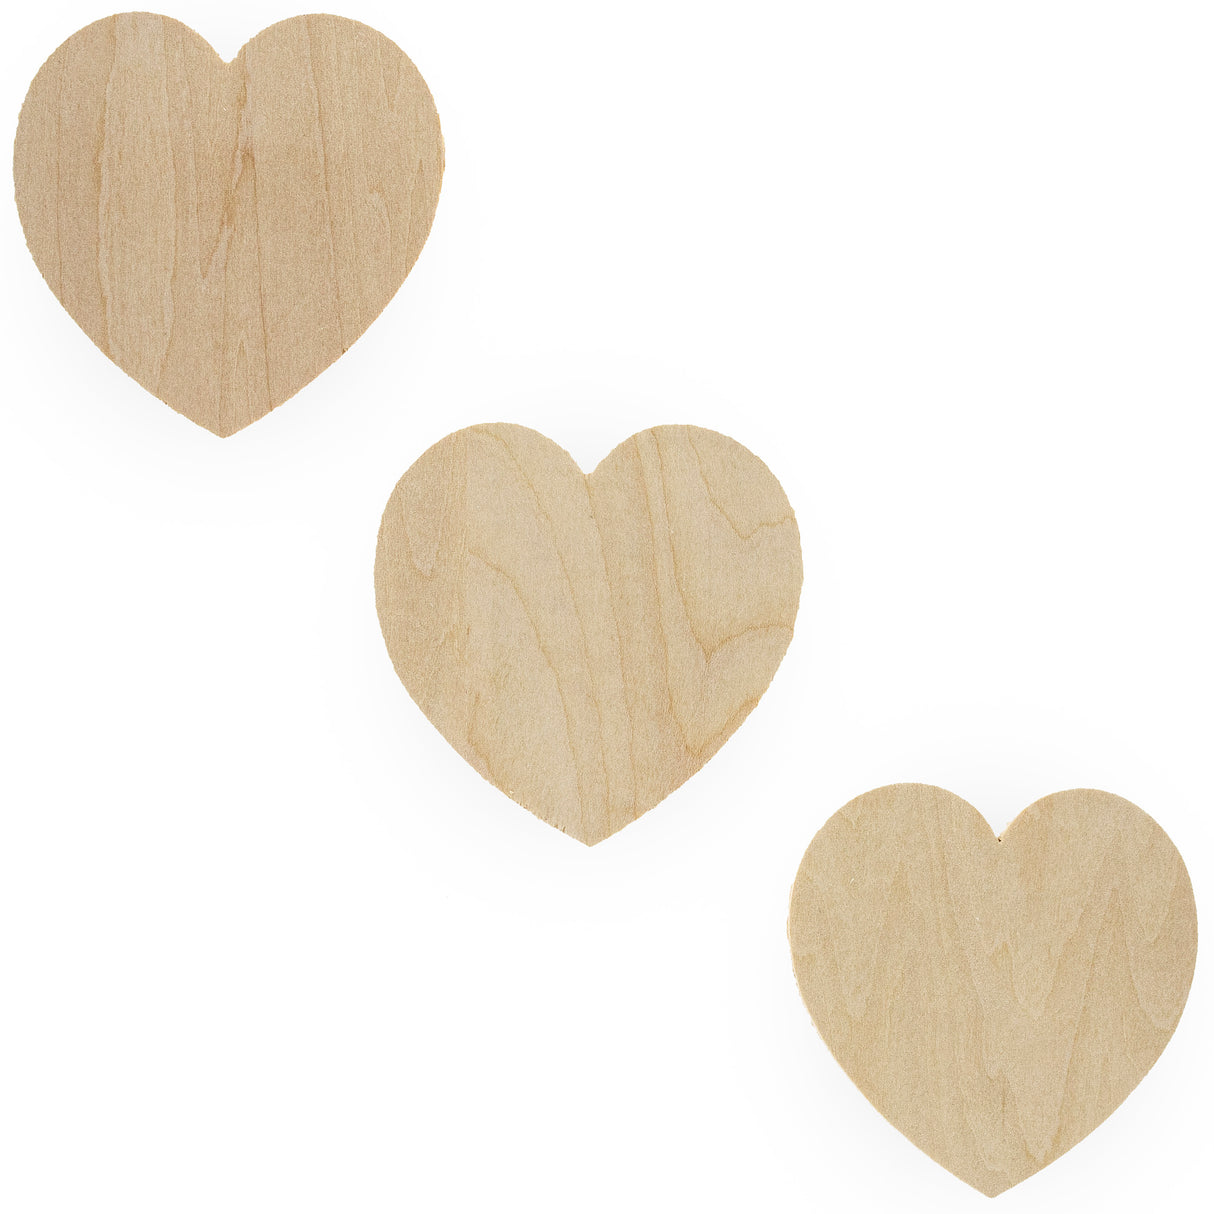 Set of 3 Unfinished Unpainted Wooden Heart Shapes Cutouts DIY Crafts 3.2 Inches in Beige color, Heart shape